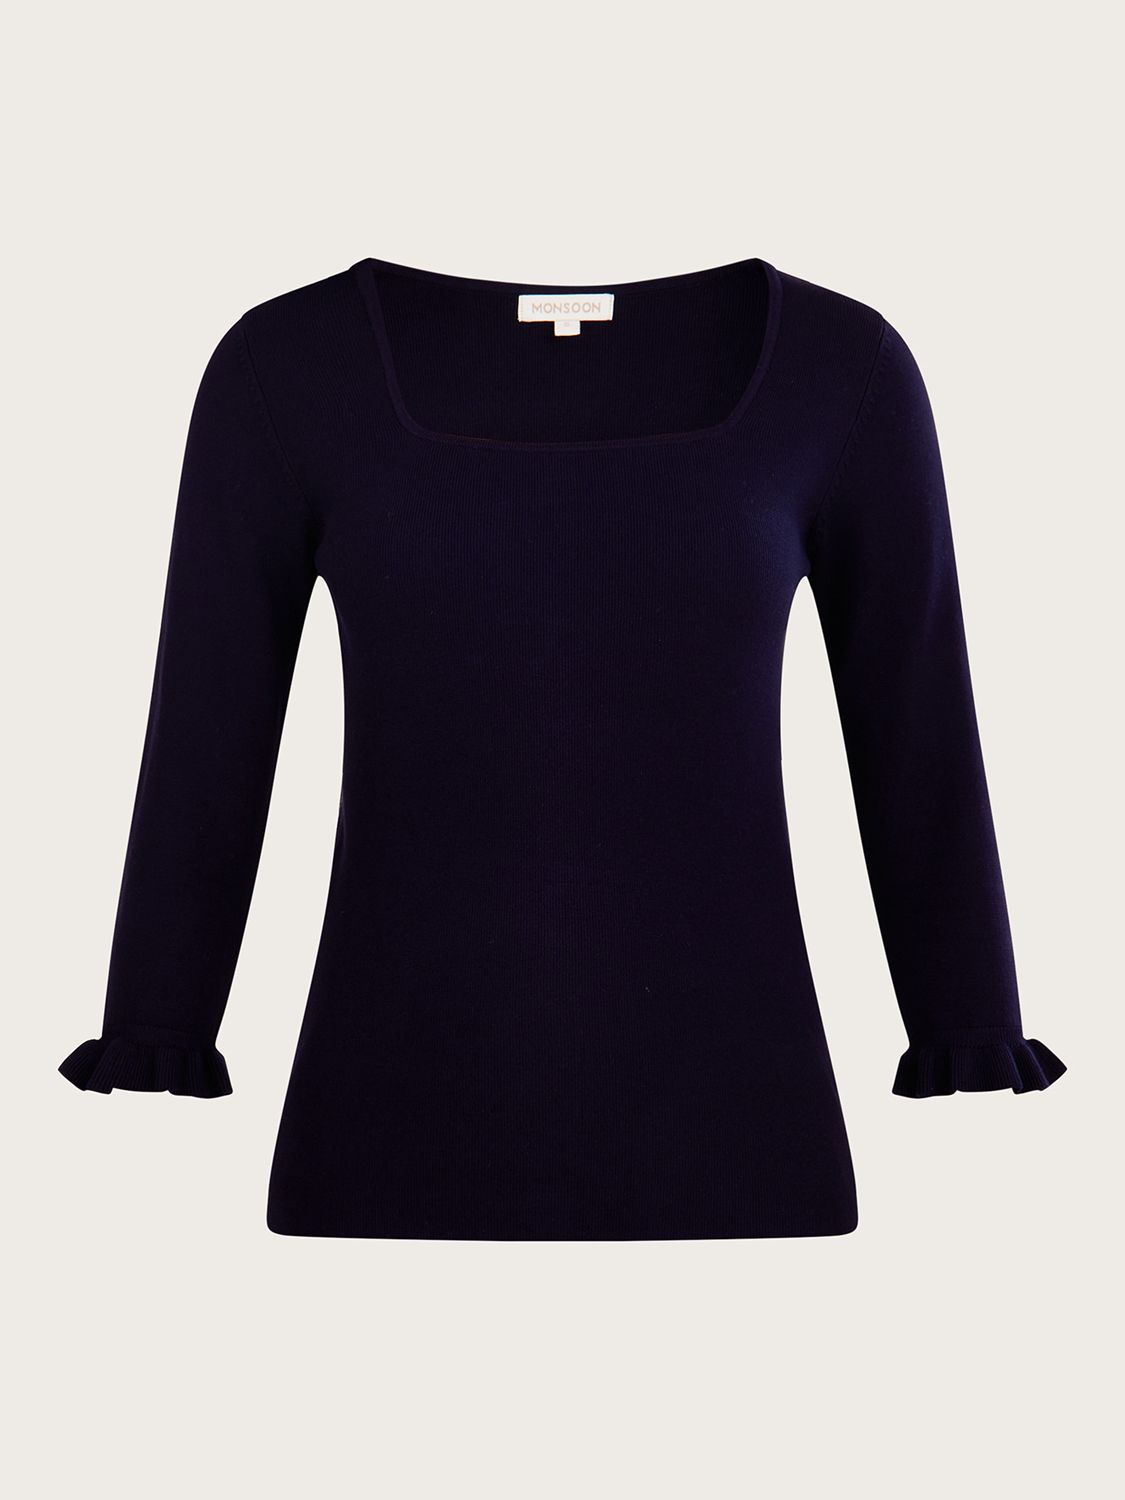 Monsoon Square Neck Frill Sleeve Jumper, Navy at John Lewis & Partners